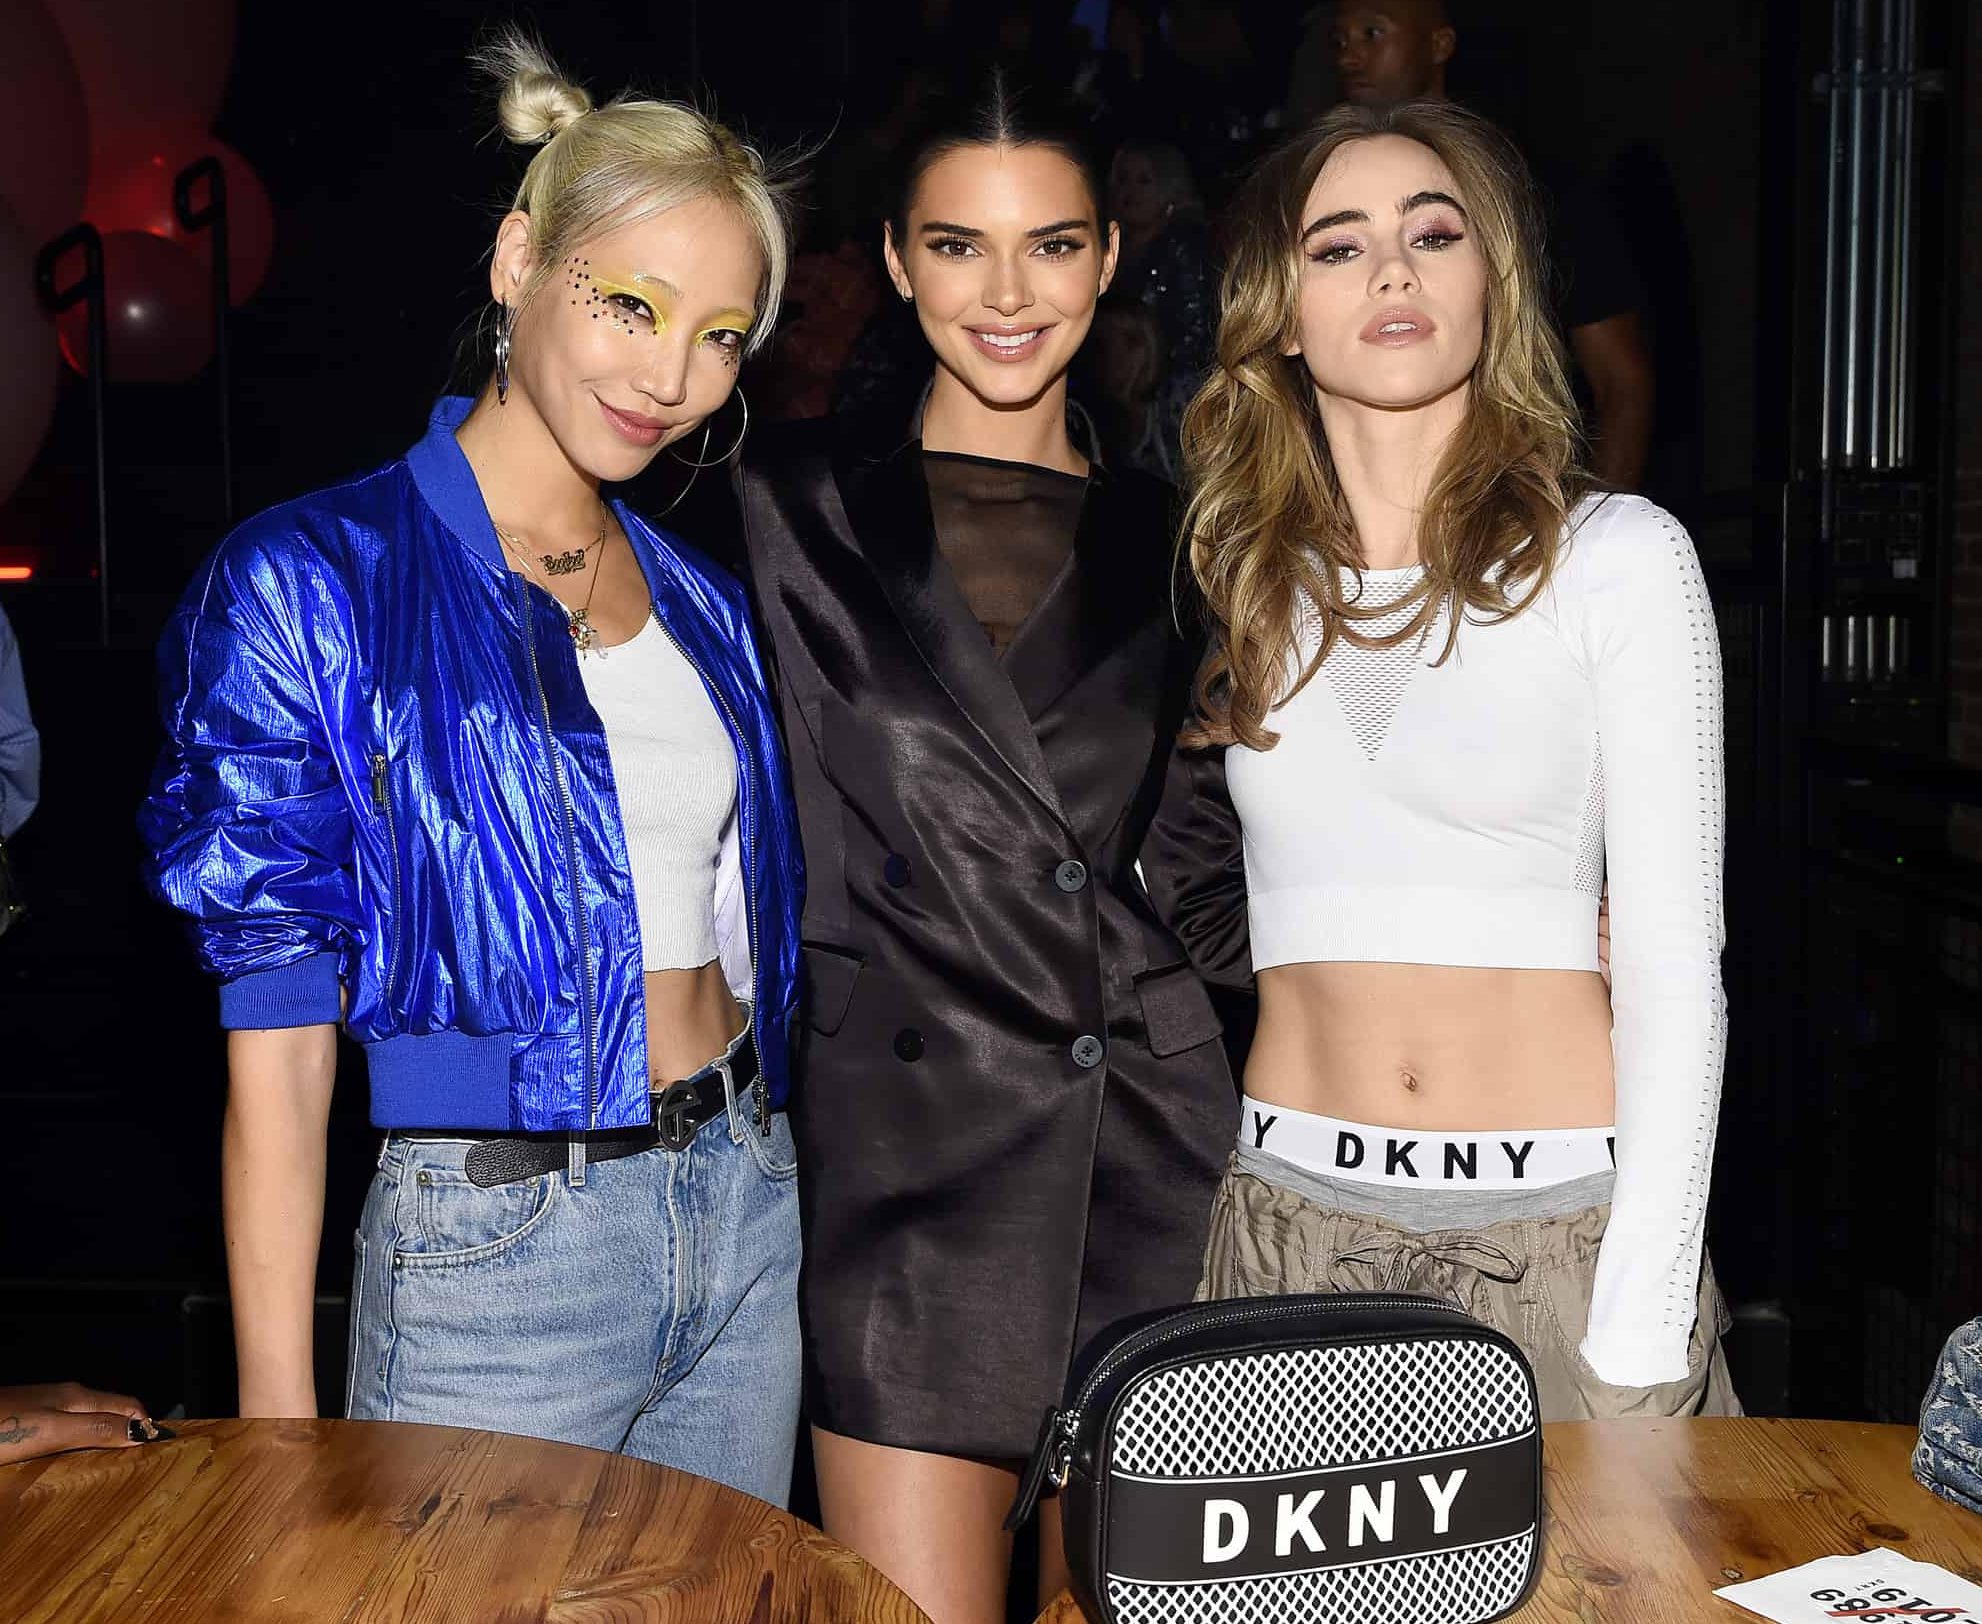 DKNY Celebrates Their 30th Anniversary With a Huge Party in Brooklyn